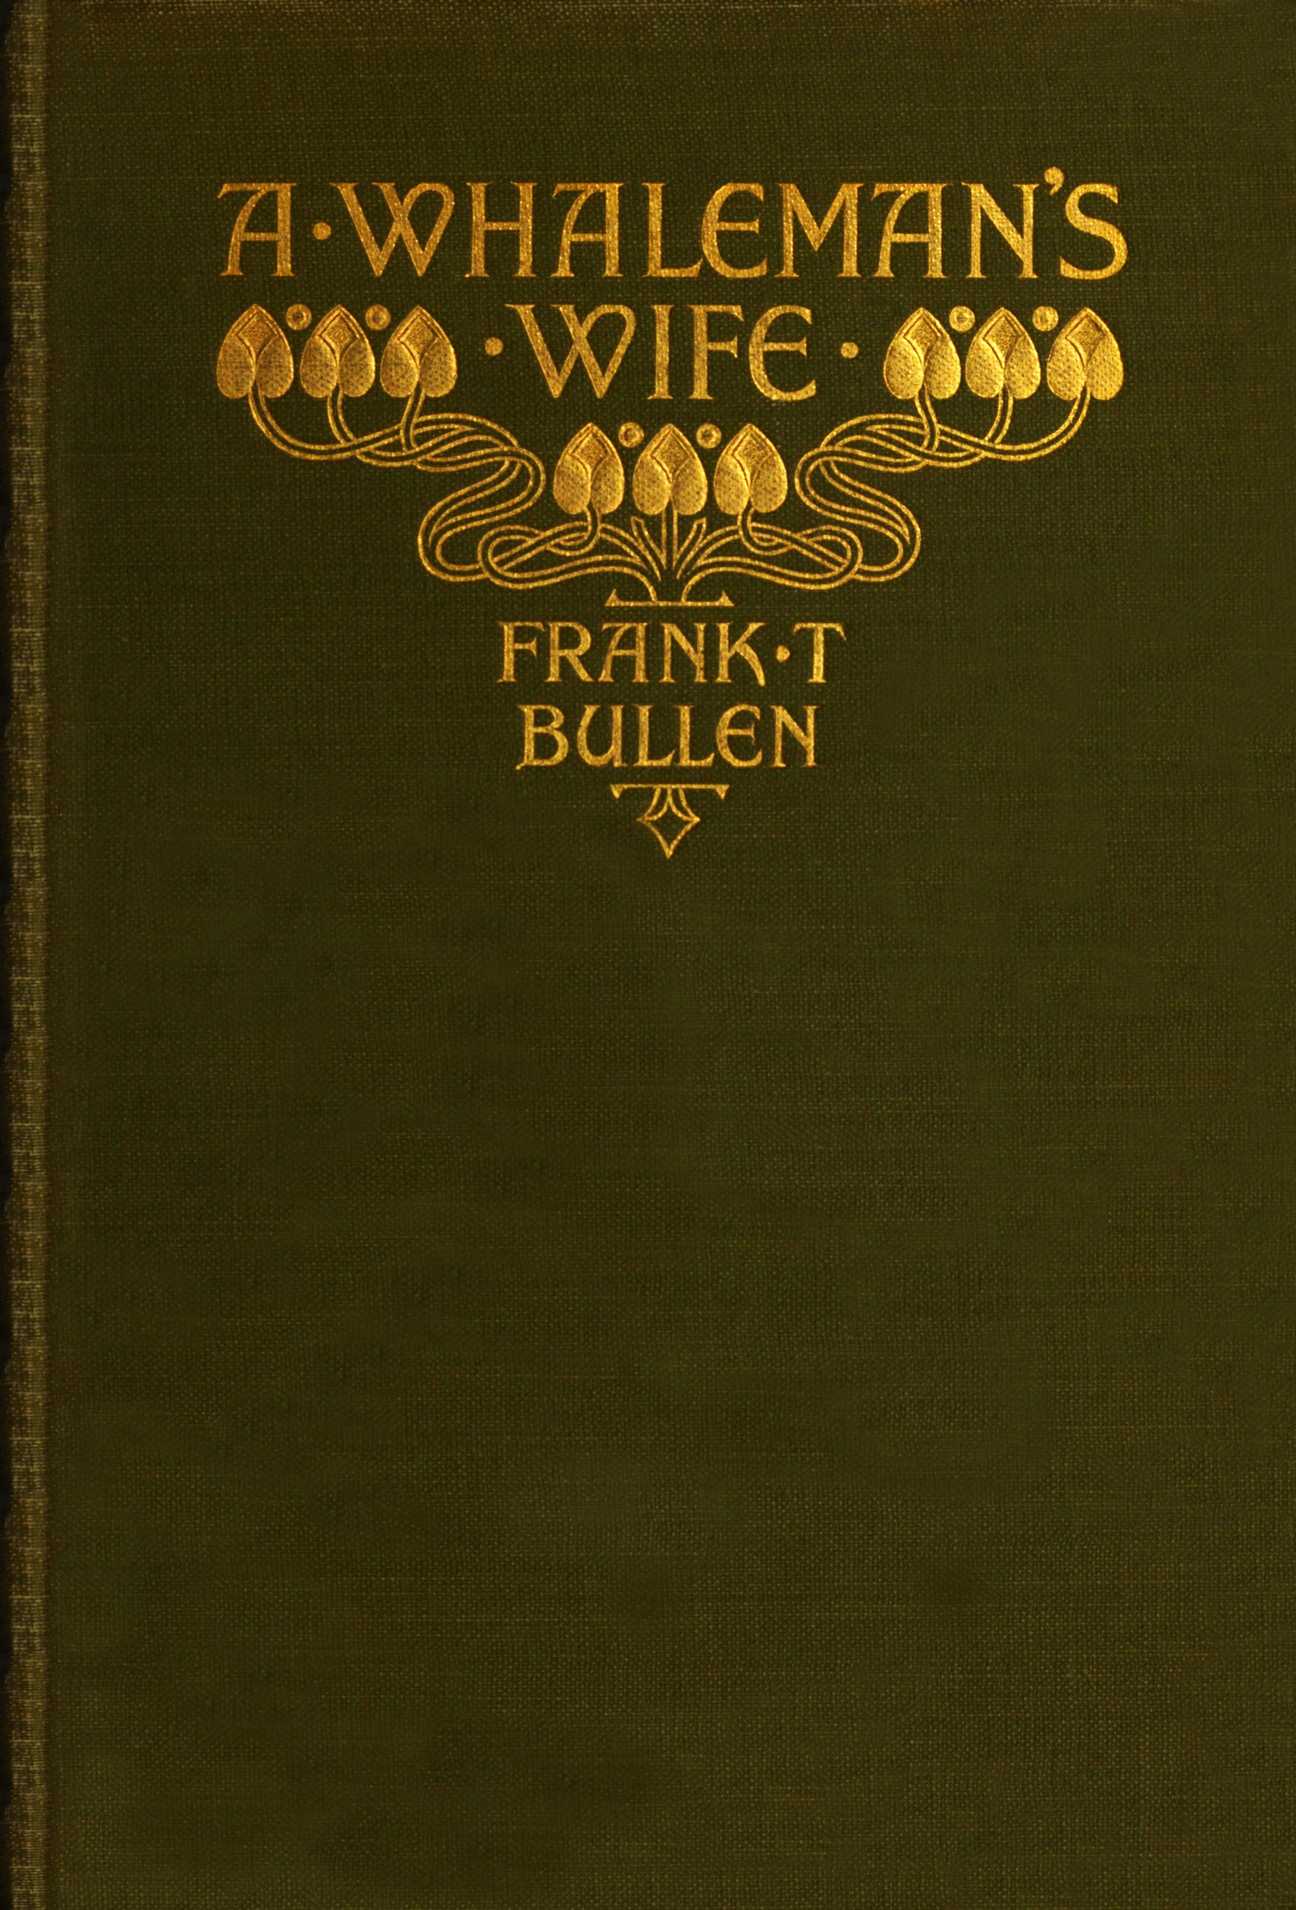 The Project Gutenberg eBook of A Whalemans Wife, by Frank Thomas Bullen